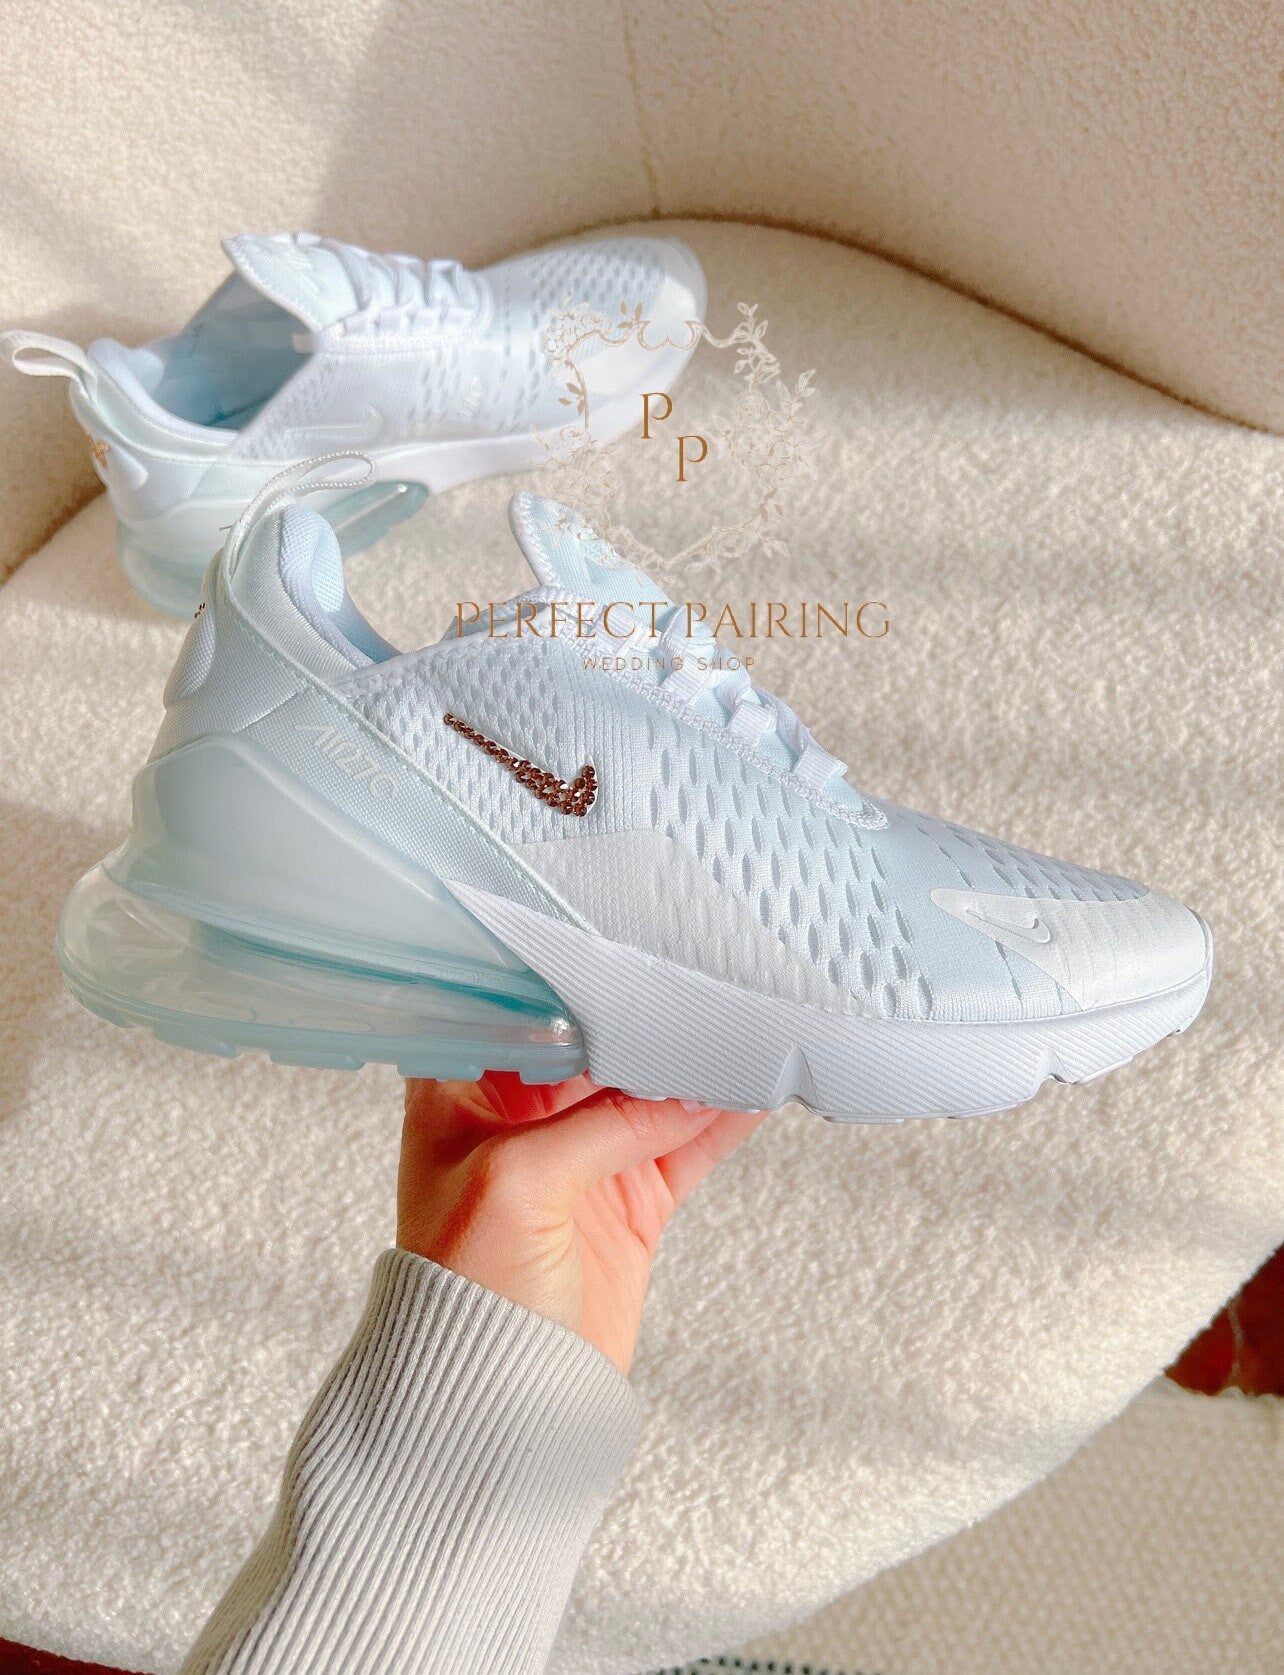 Wedding Shoes Nike Air Max 270 Custom Sneaker With Crystals